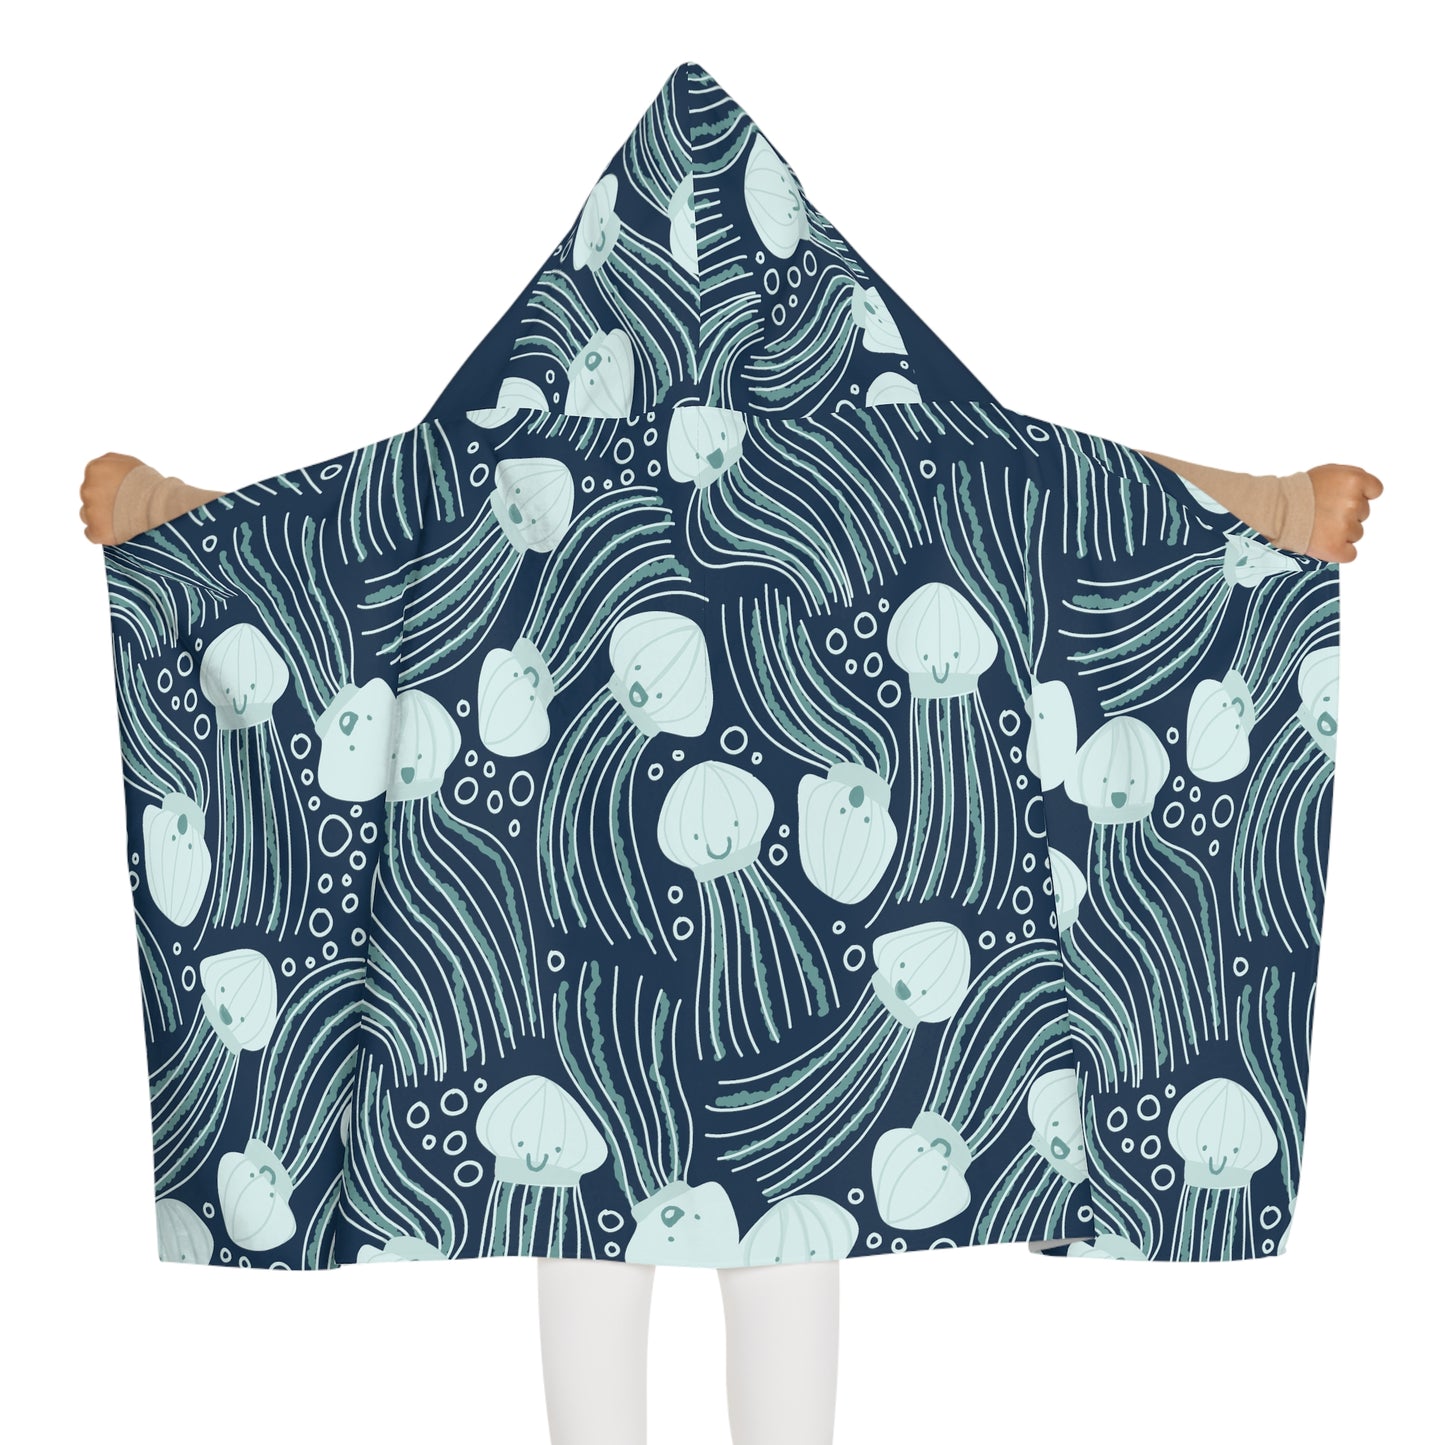 Jellyfish Towel Personalized Gift Beach Towel with Name Hooded Towel Blue and Green Towel for Child